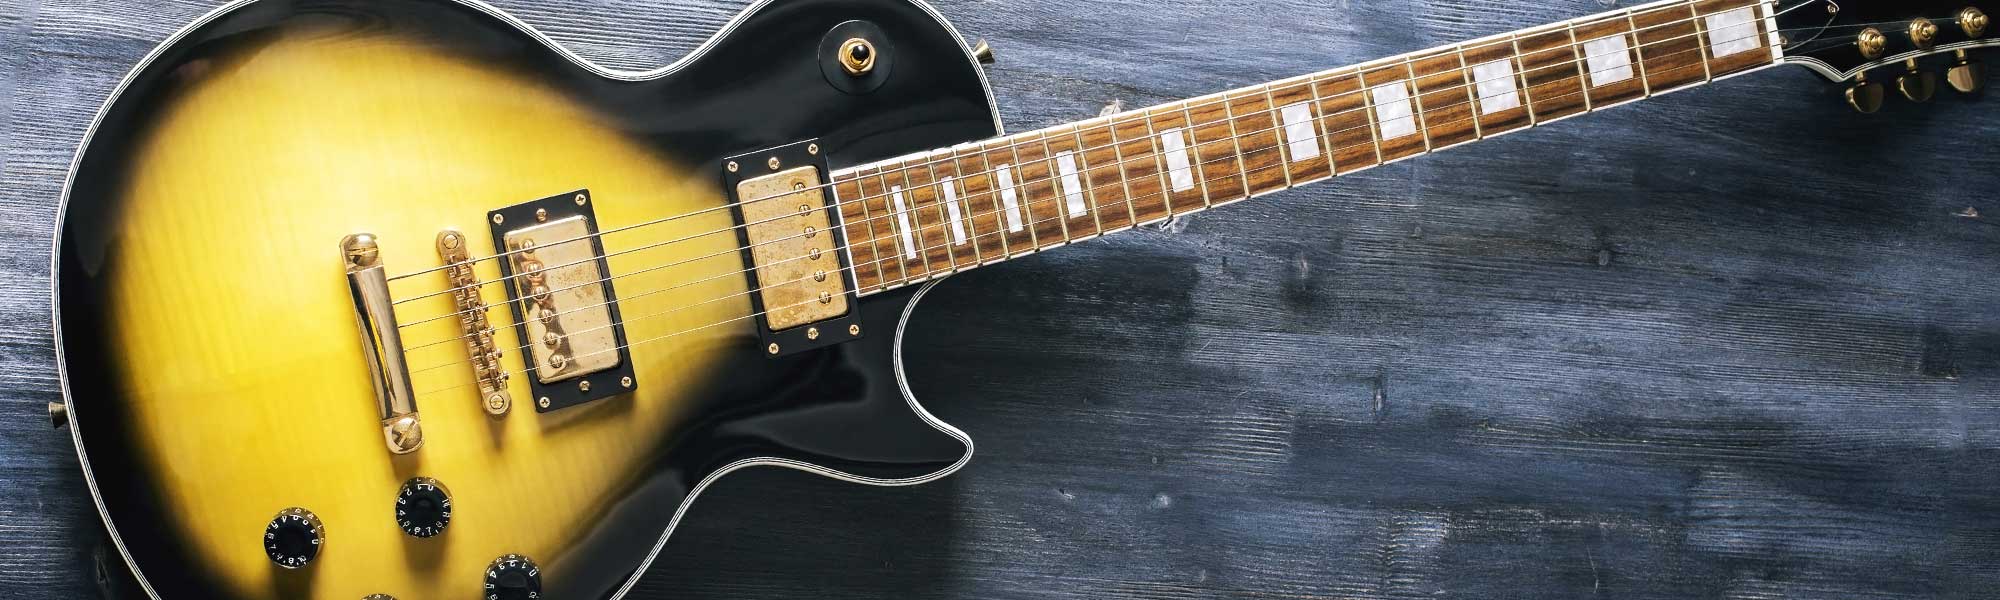 Black and Yellow Guitar